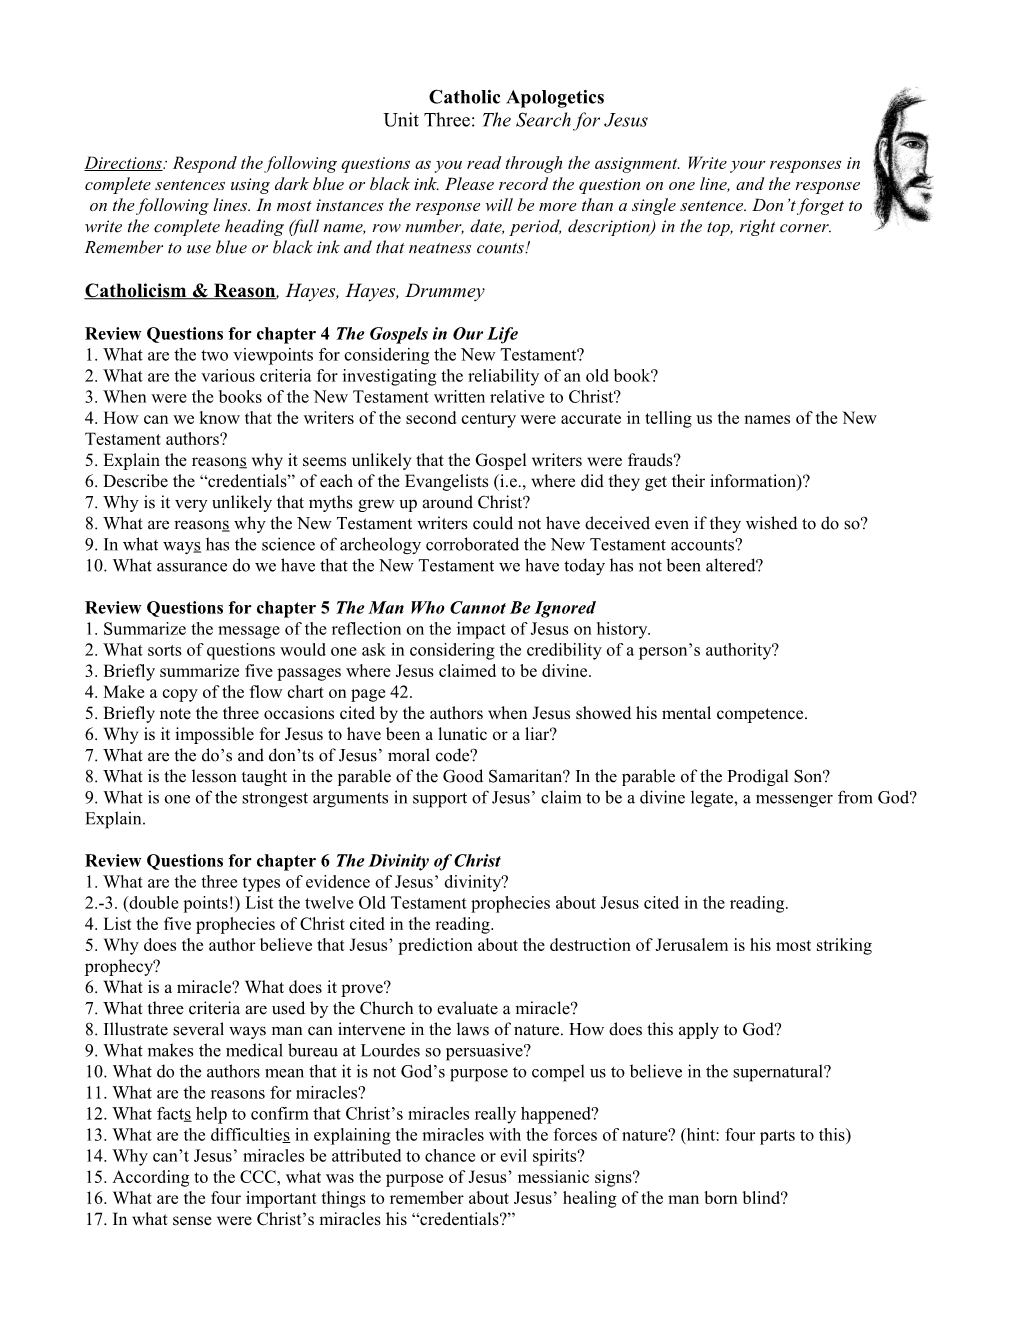 Review Questions for Chapter 4The Gospels in Our Life